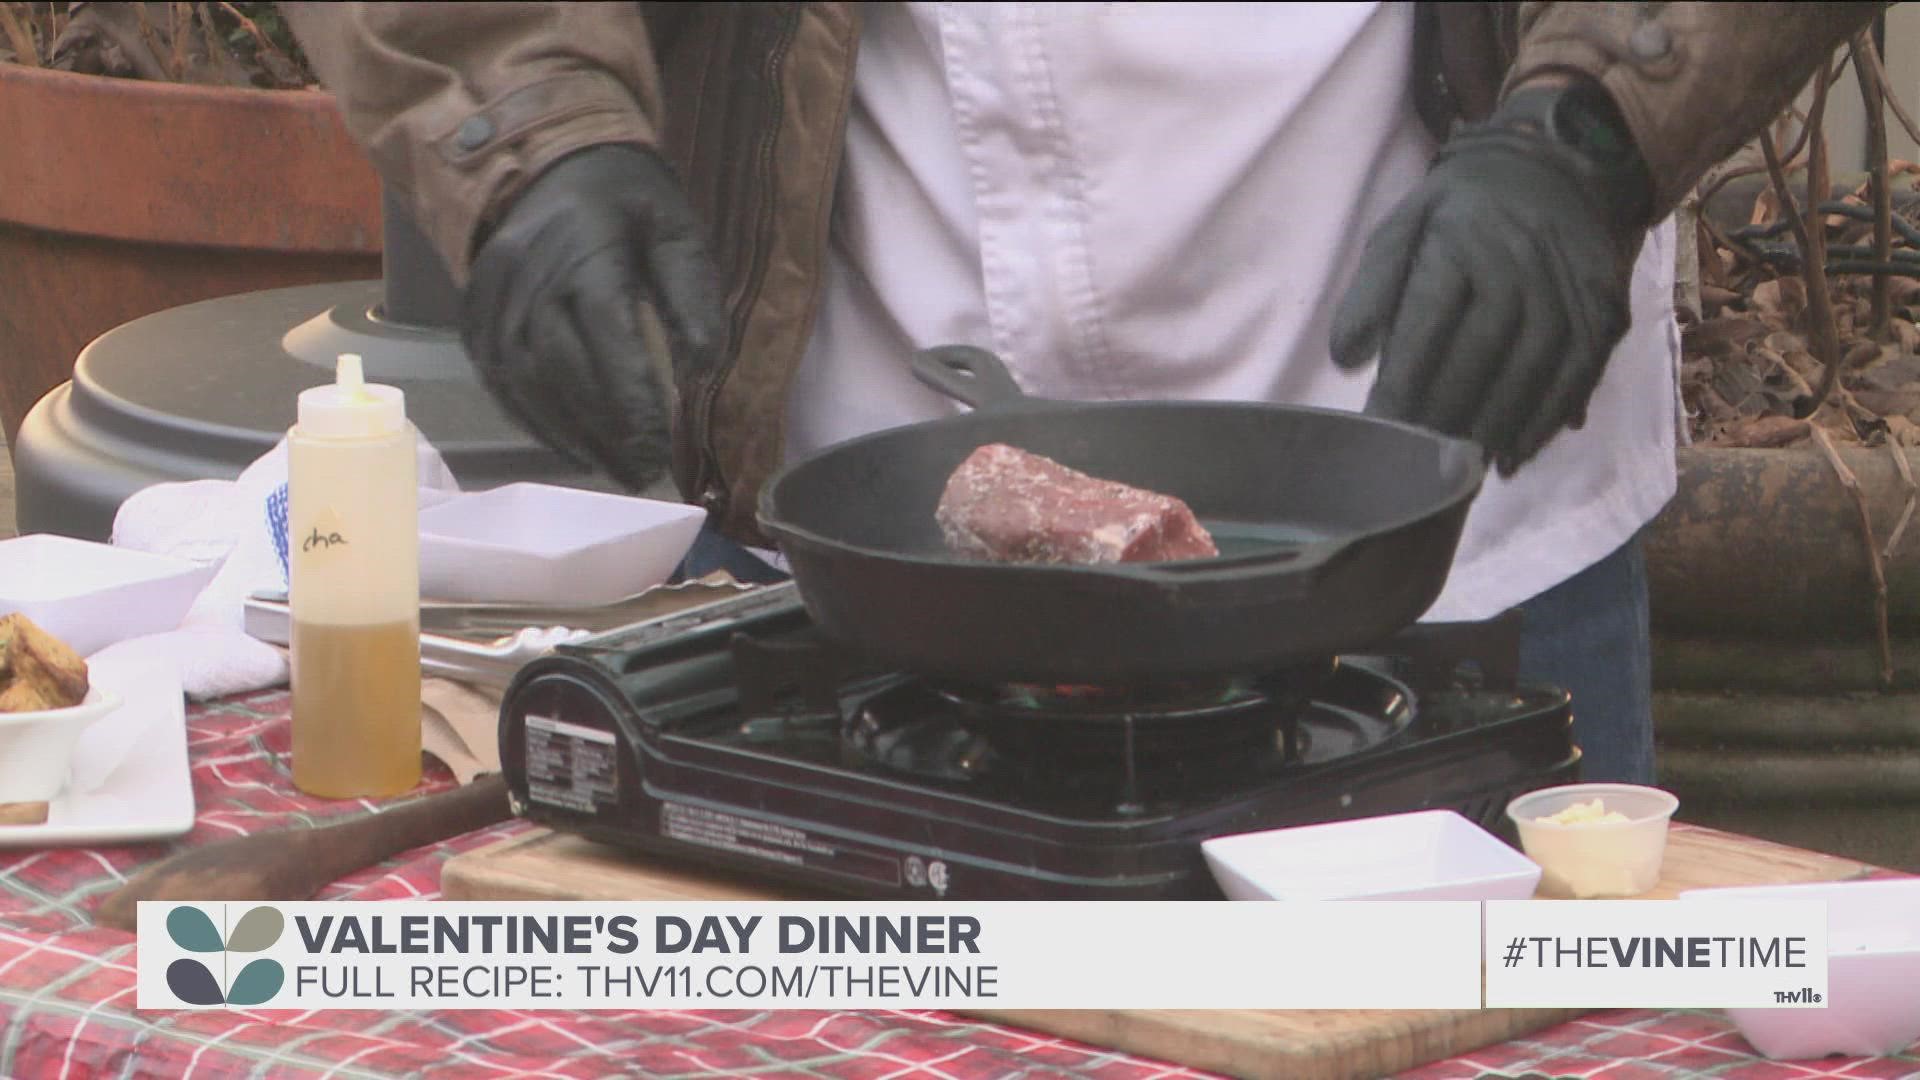 Chef Serge from Vibrant Occasions Catering is here to show us how to make the perfect Valentine's Day dinner.